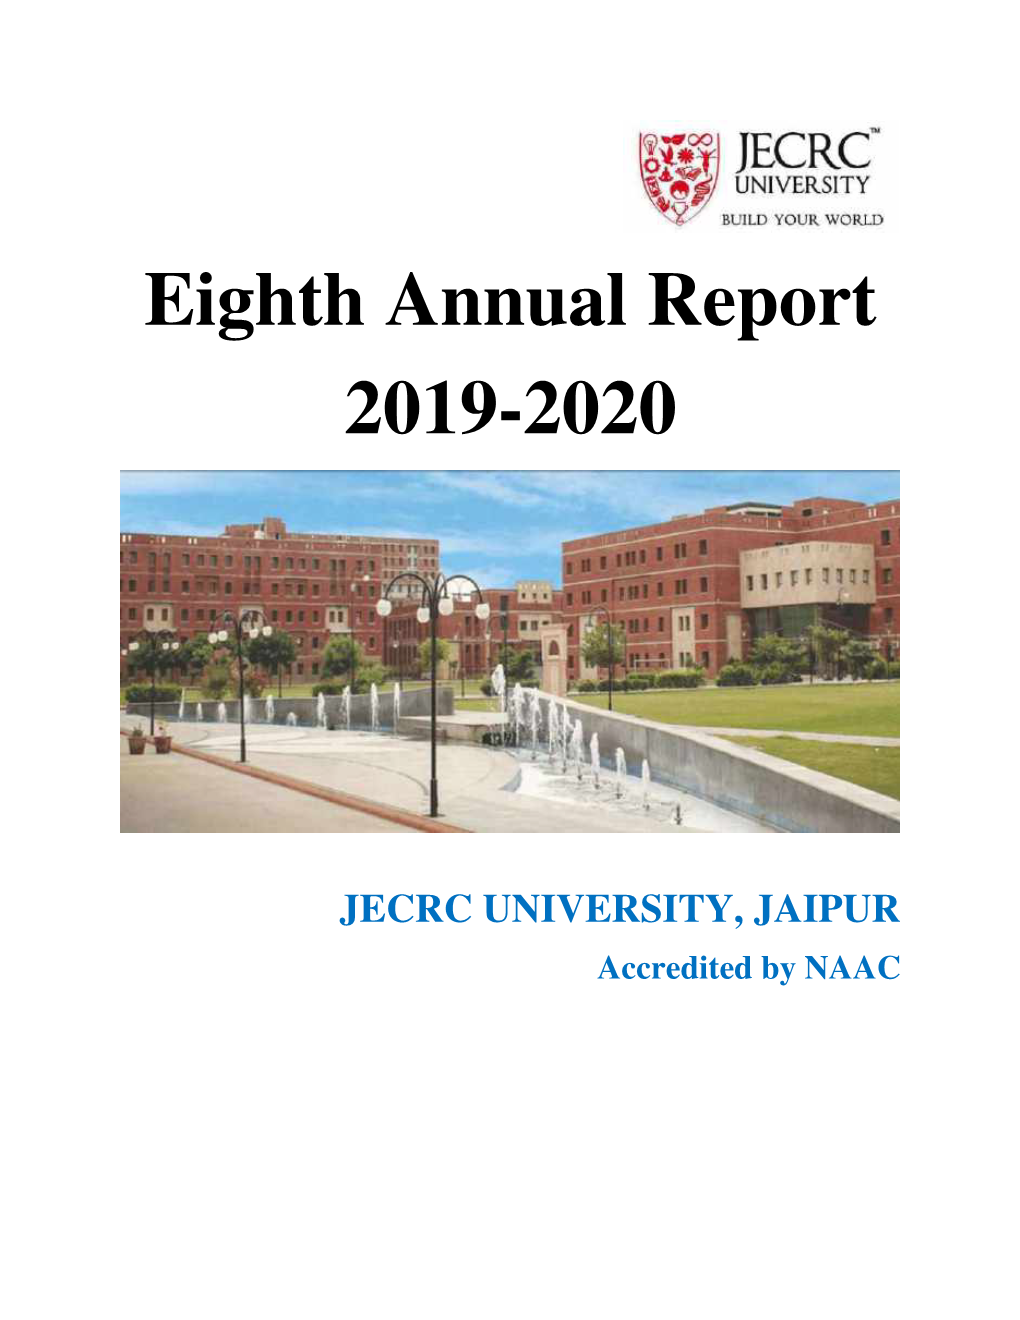 Eighth Annual Report 2019-2020